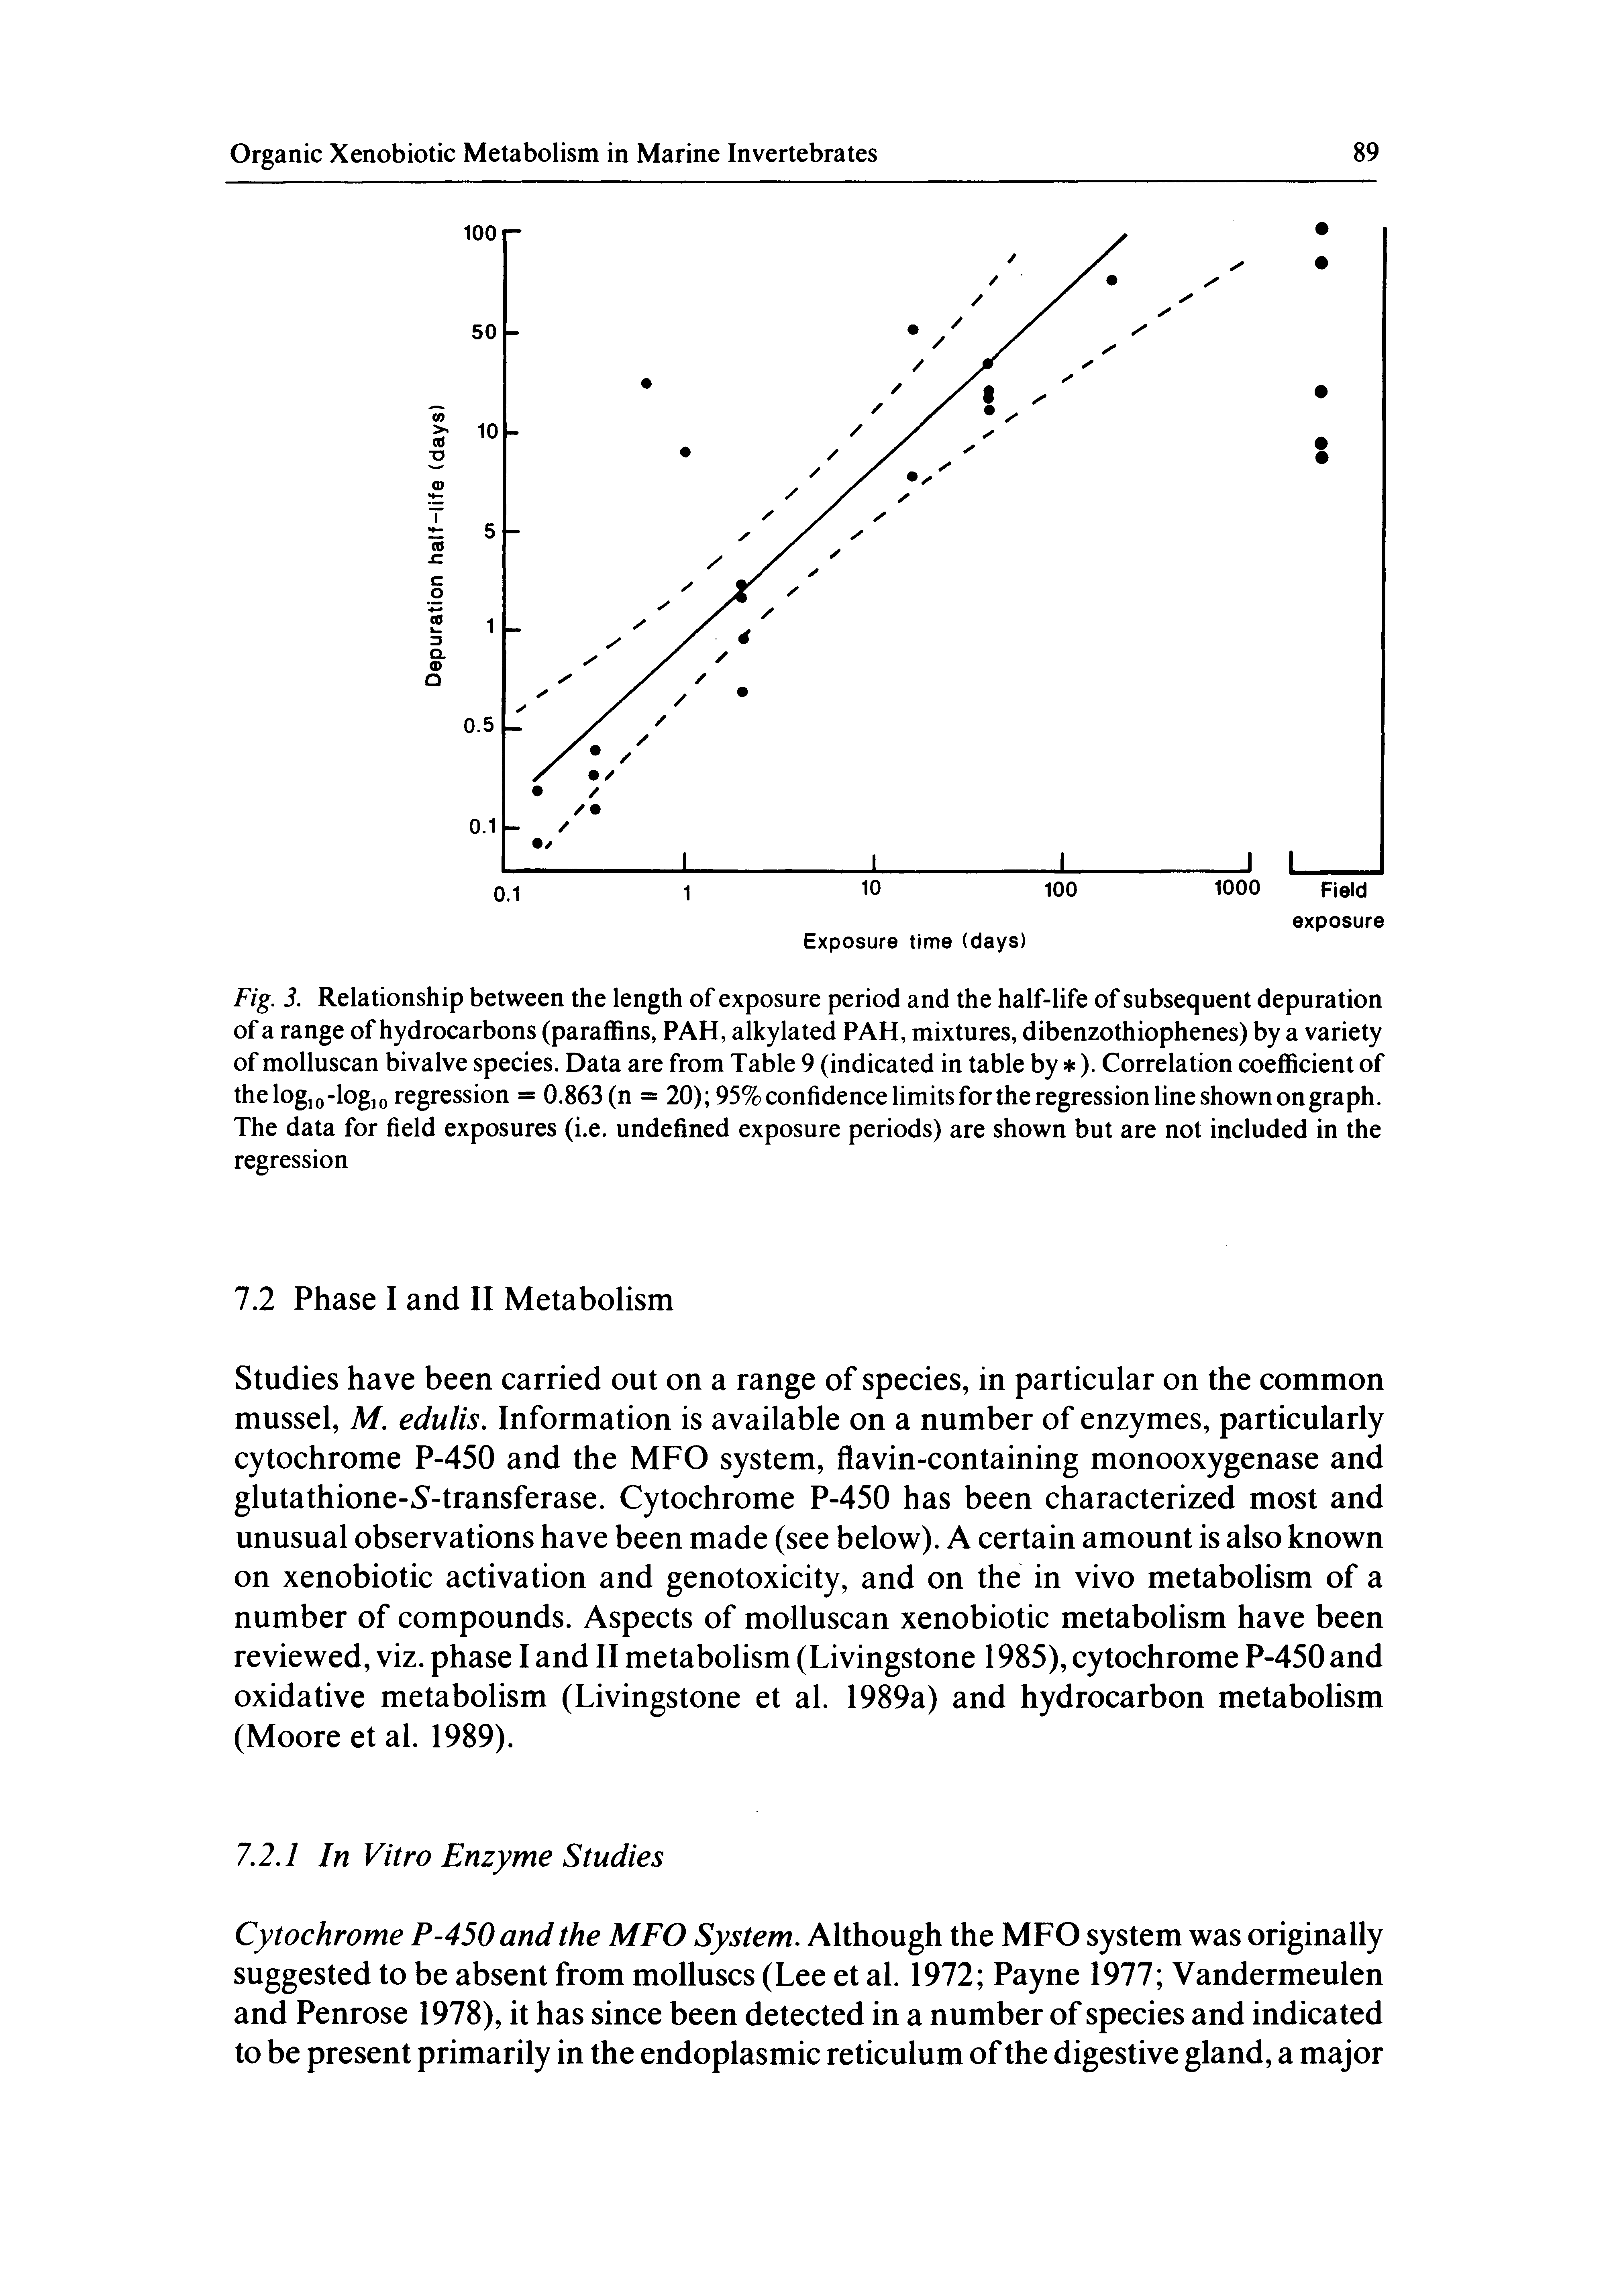 Fig. 3. Relationship between the length of exposure period and the half-life of subsequent depuration of a range of hydrocarbons (paraffins, PAH, alkylated PAH, mixtures, dibenzothiophenes) by a variety of molluscan bivalve species. Data are from Table 9 (indicated in table by ). Correlation coefficient of the logio-logio regression = 0.863 (n = 20) 95% confidence limits for the regression line shown on graph. The data for field exposures (i.e. undefined exposure periods) are shown but are not included in the regression...